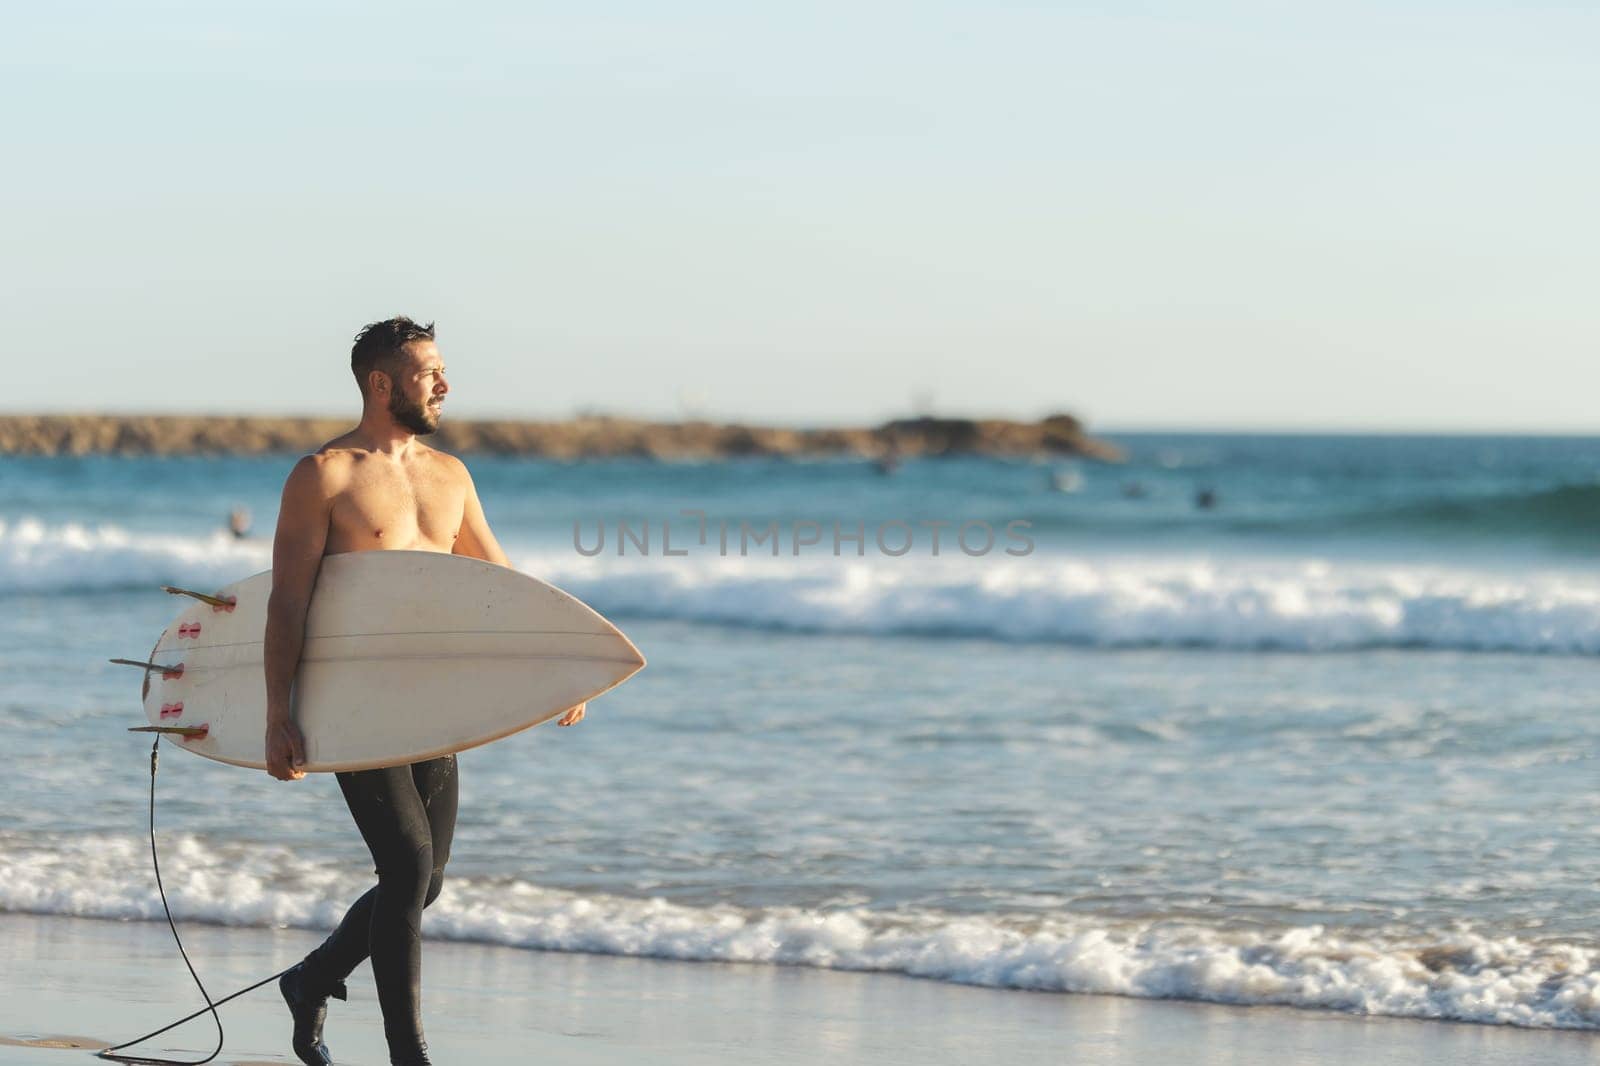 A smiling man surfer with naked torso walking on the seashore. Mid shot